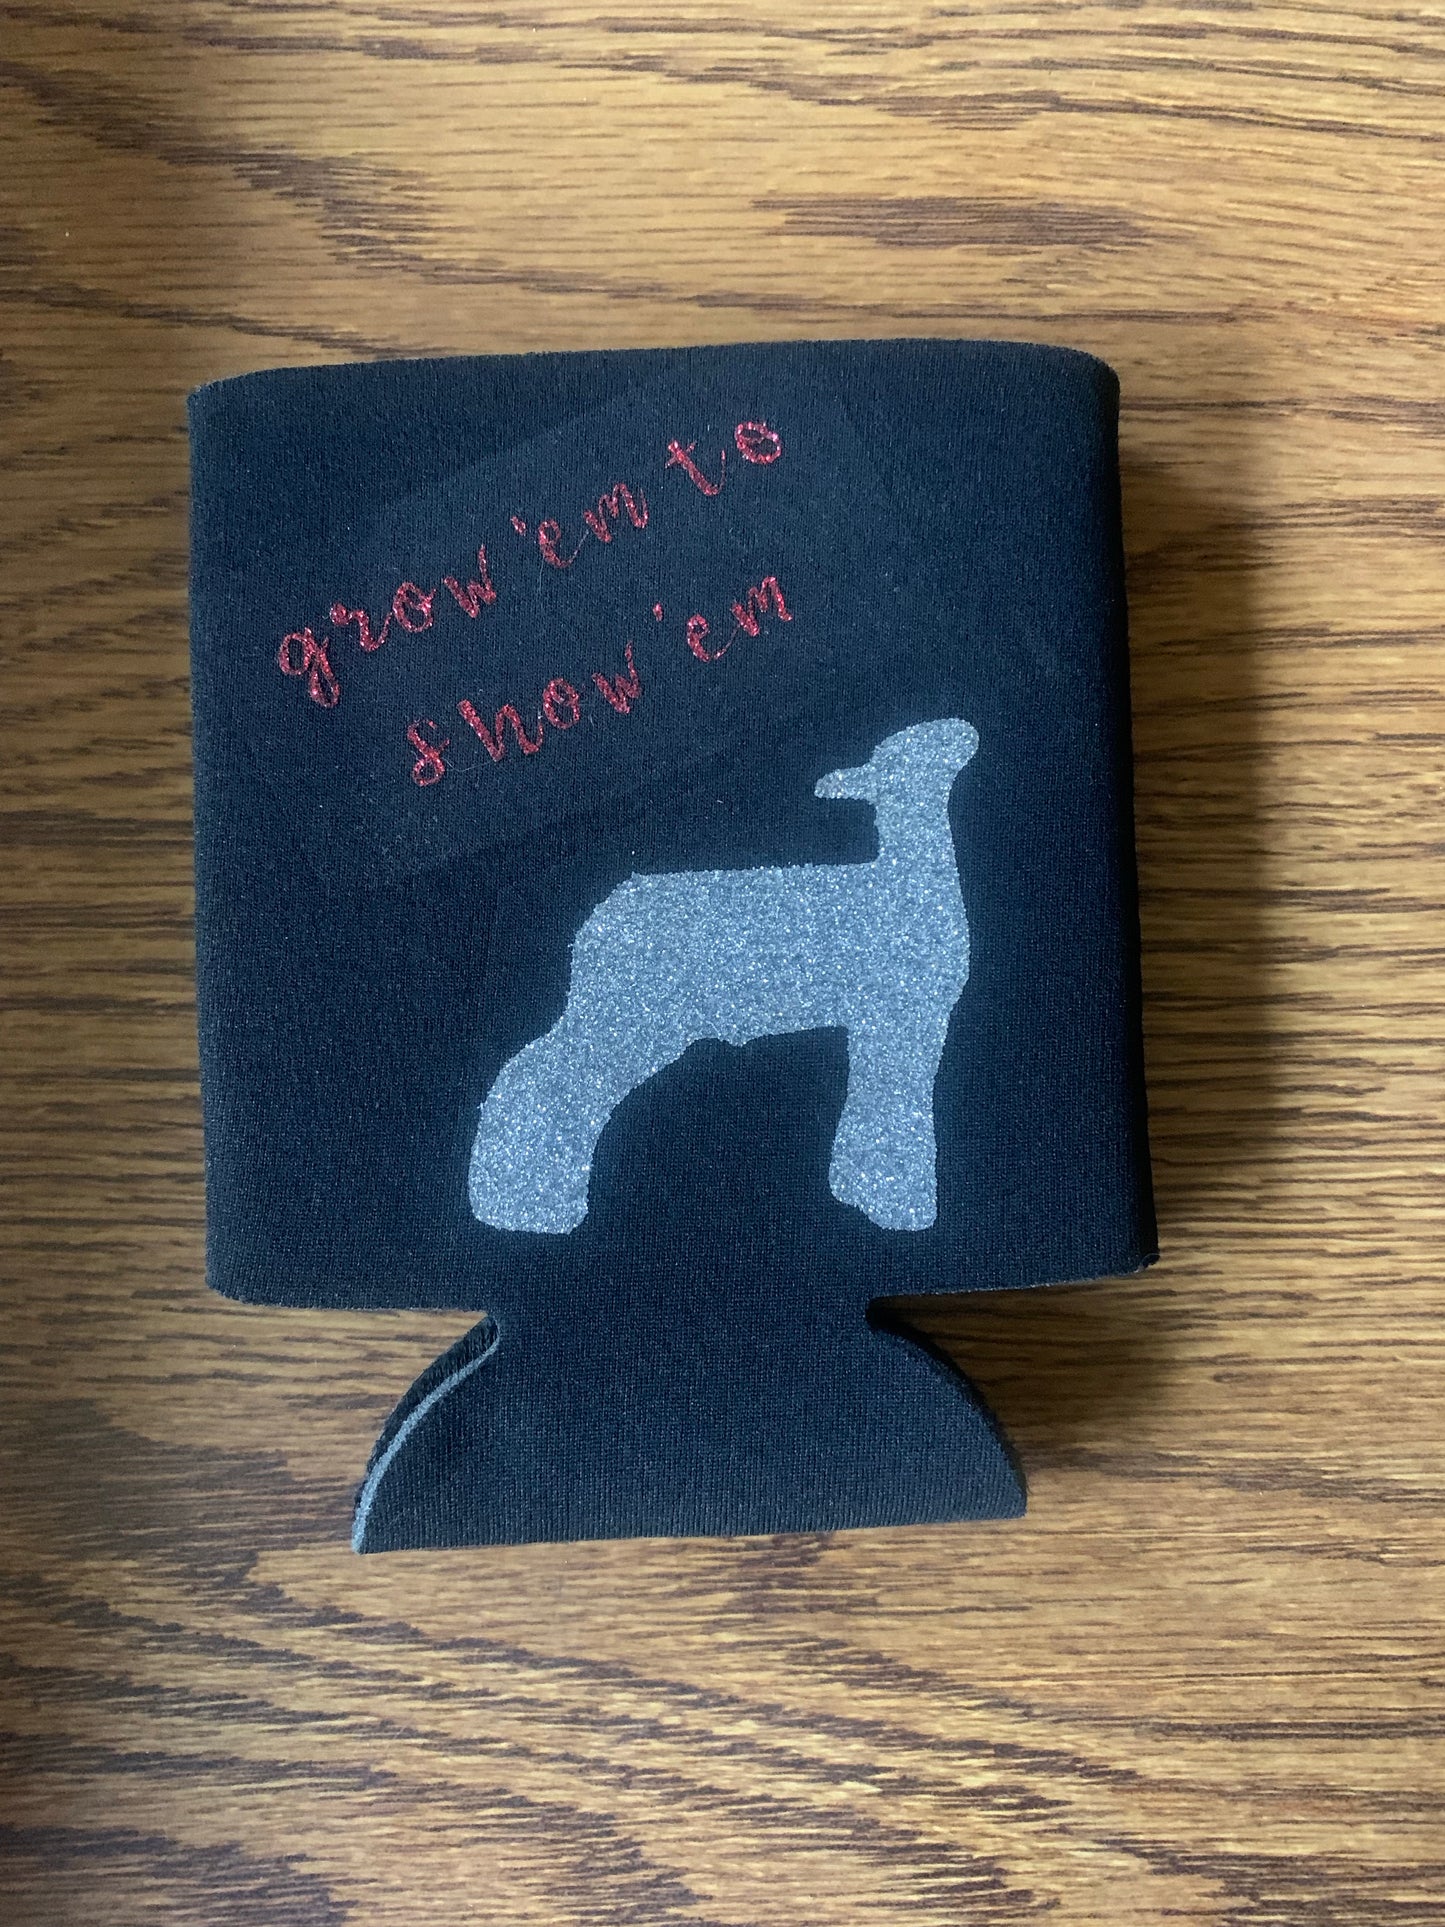 Ready to ship coozies